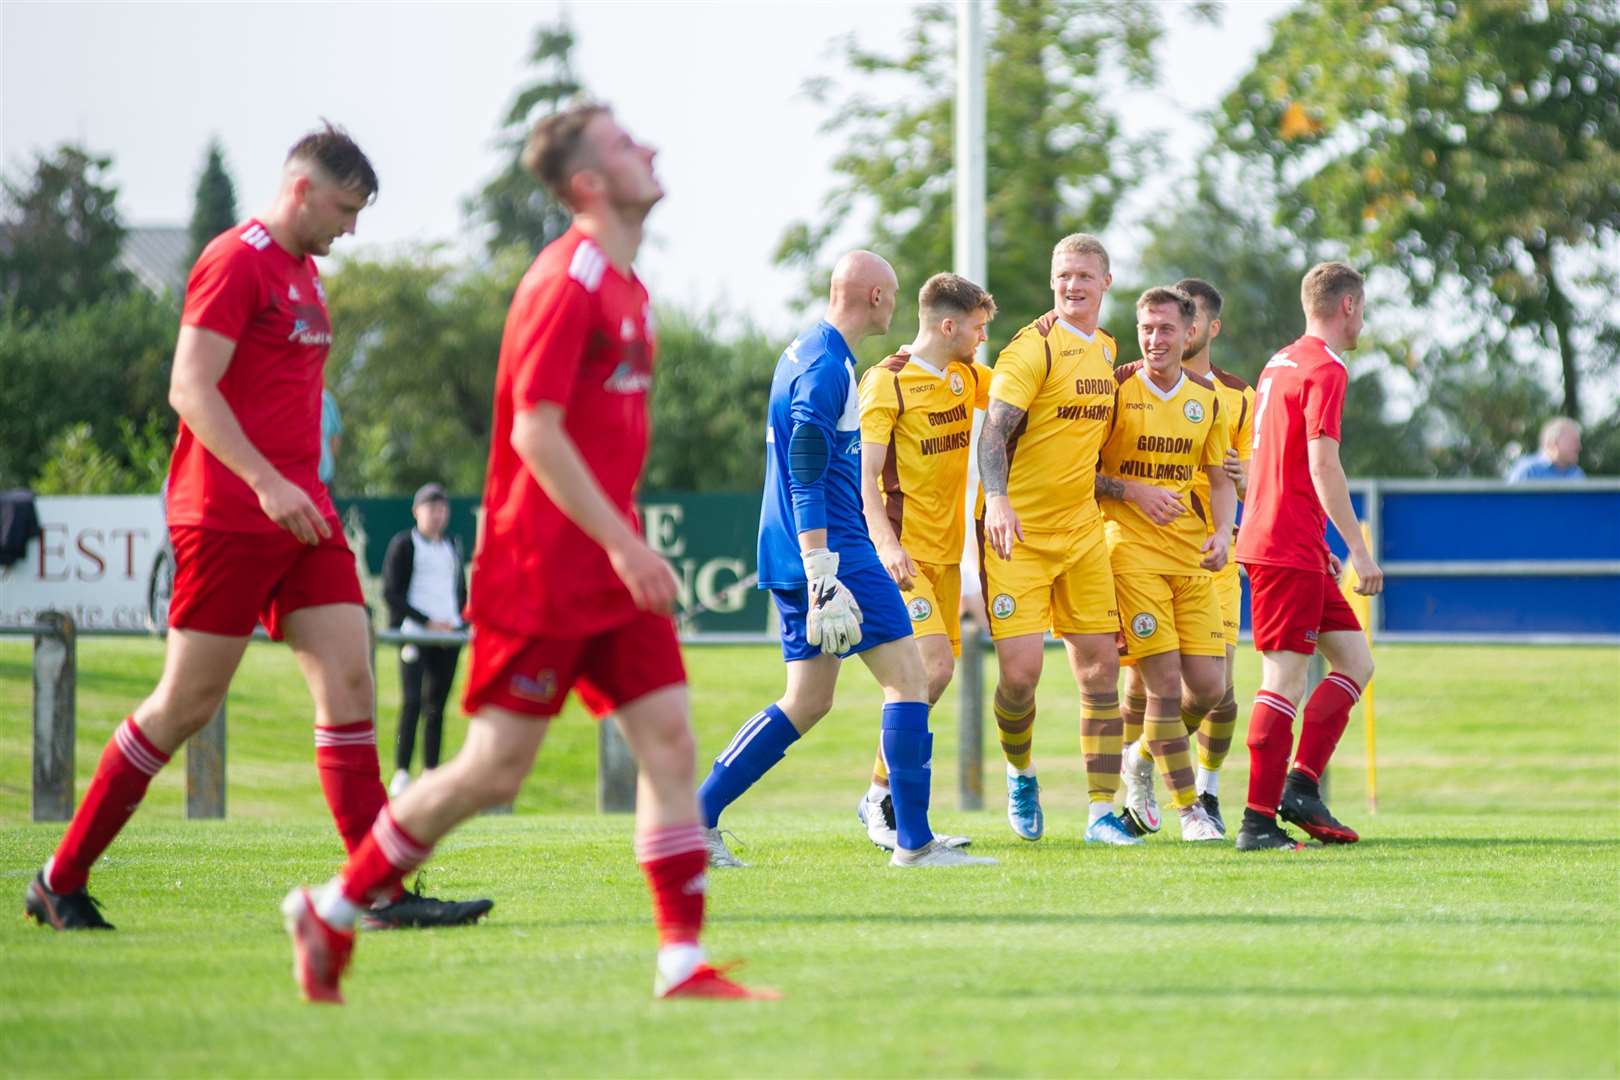 Forres frontman Lee Fraser celebrates after he scored the only goal of the afternoon. ..Forres Mechanics FC (1) vs Lossiemouth FC (0) - Highland Football League - Mosset Park, Forres 28/08/2021...Picture: Daniel Forsyth..